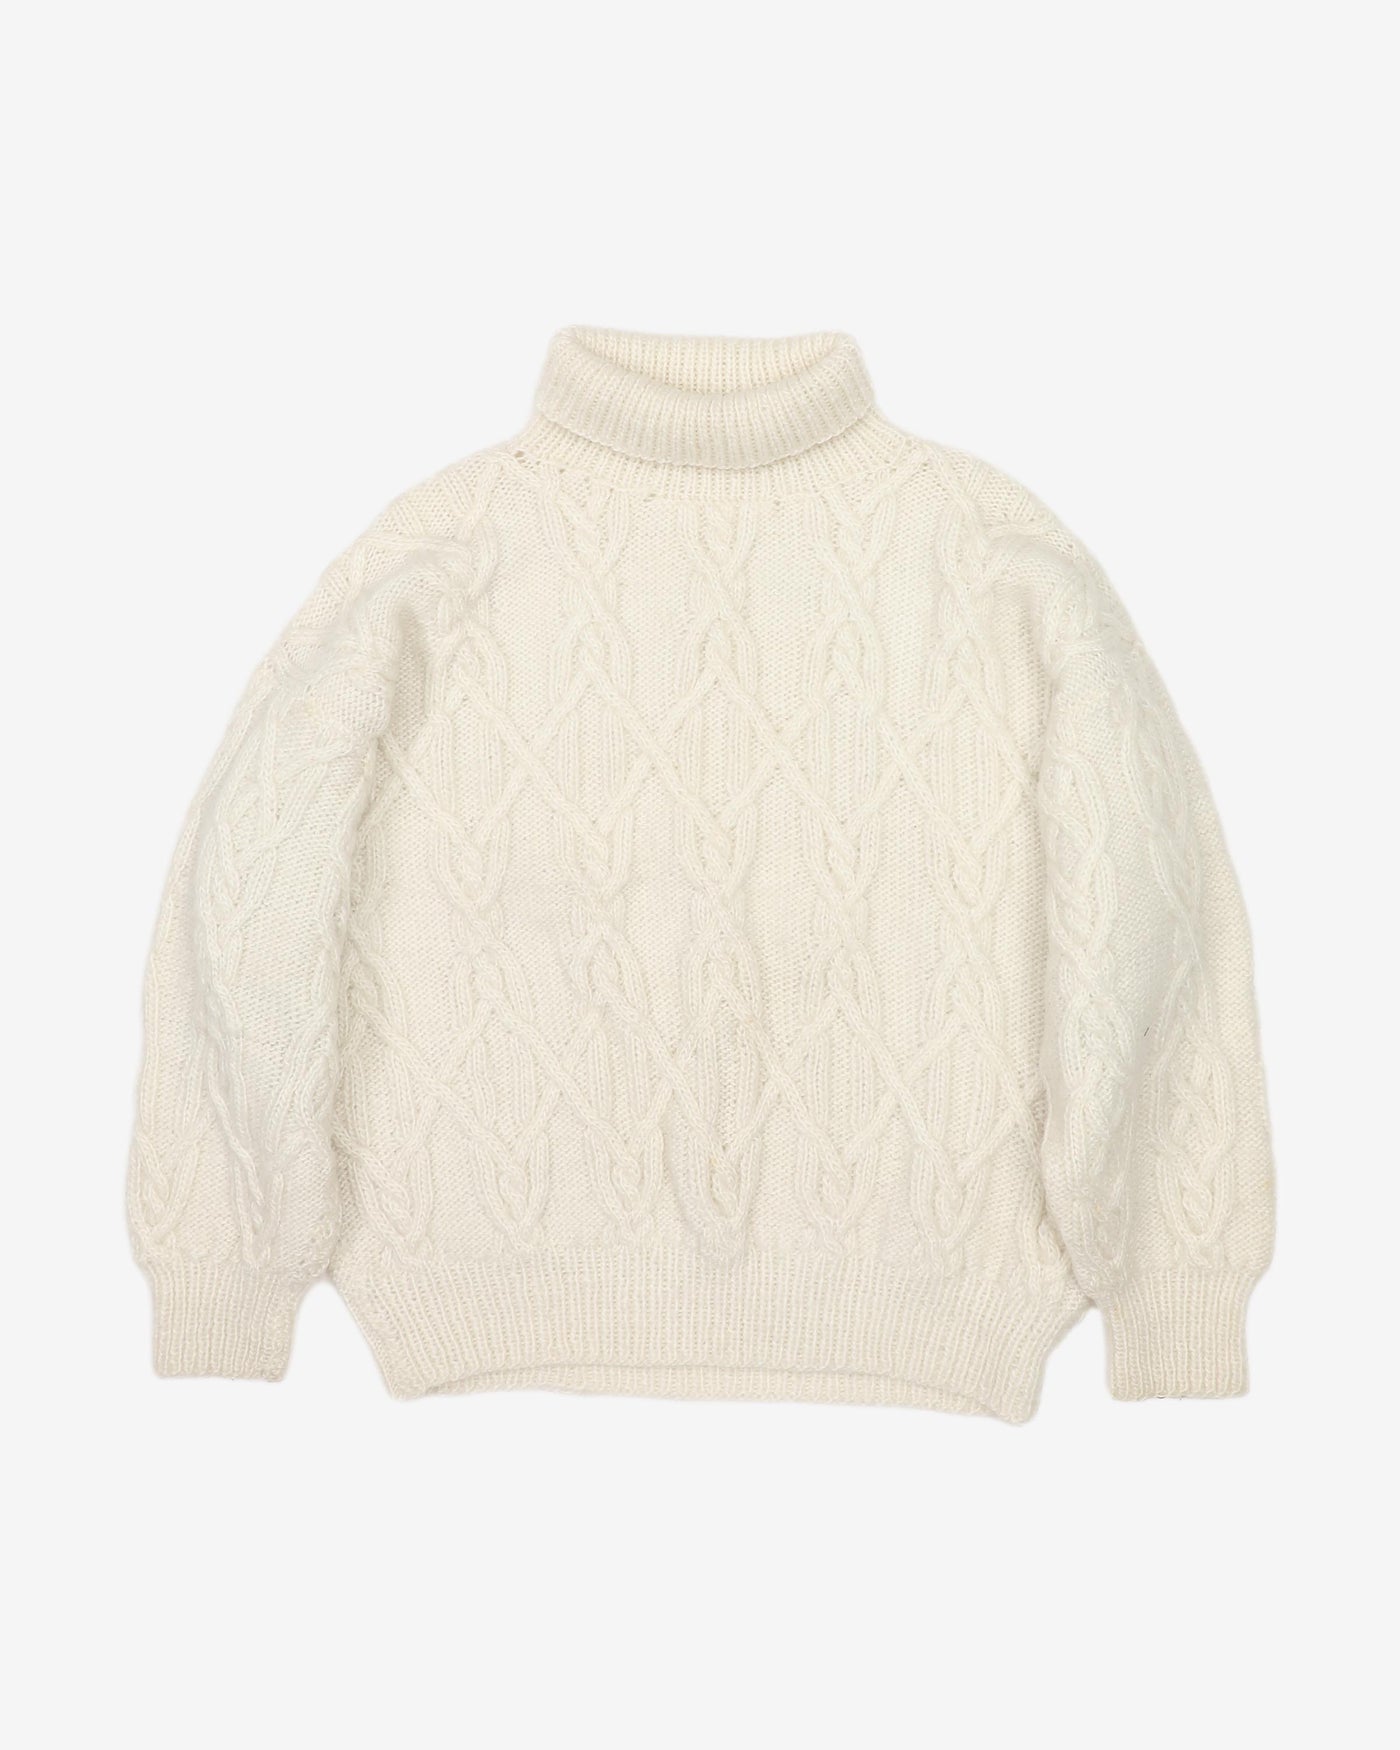 White Plaited Patterned hand Knitted Roll-Neck Jumper - M